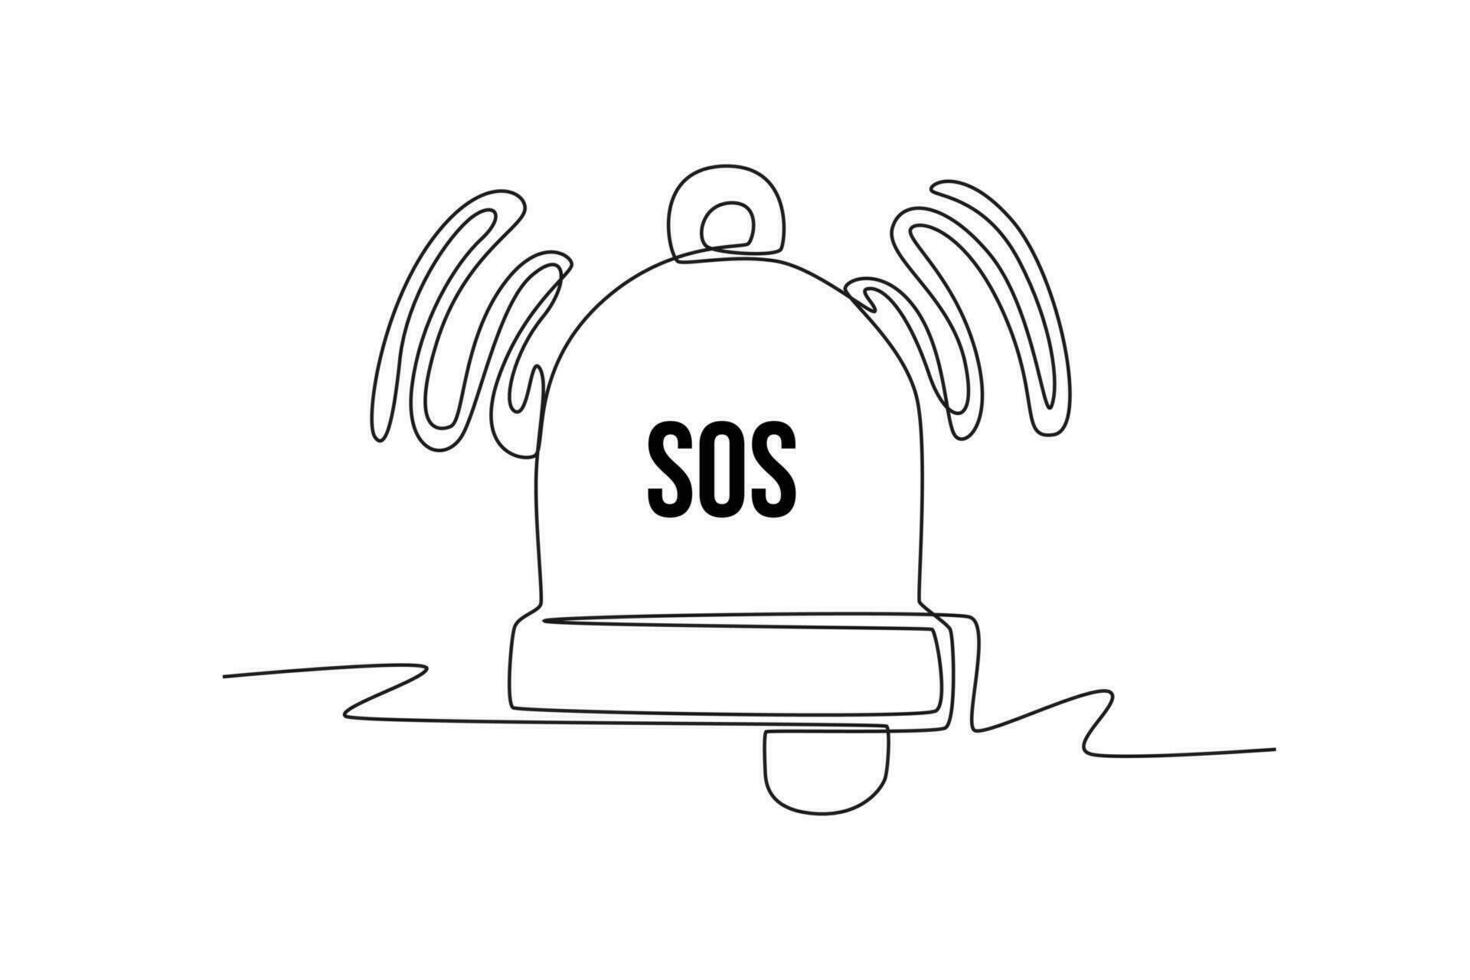 Single one line drawing flasher siren with text SOS. SOS concept. Continuous line draw design graphic vector illustration.